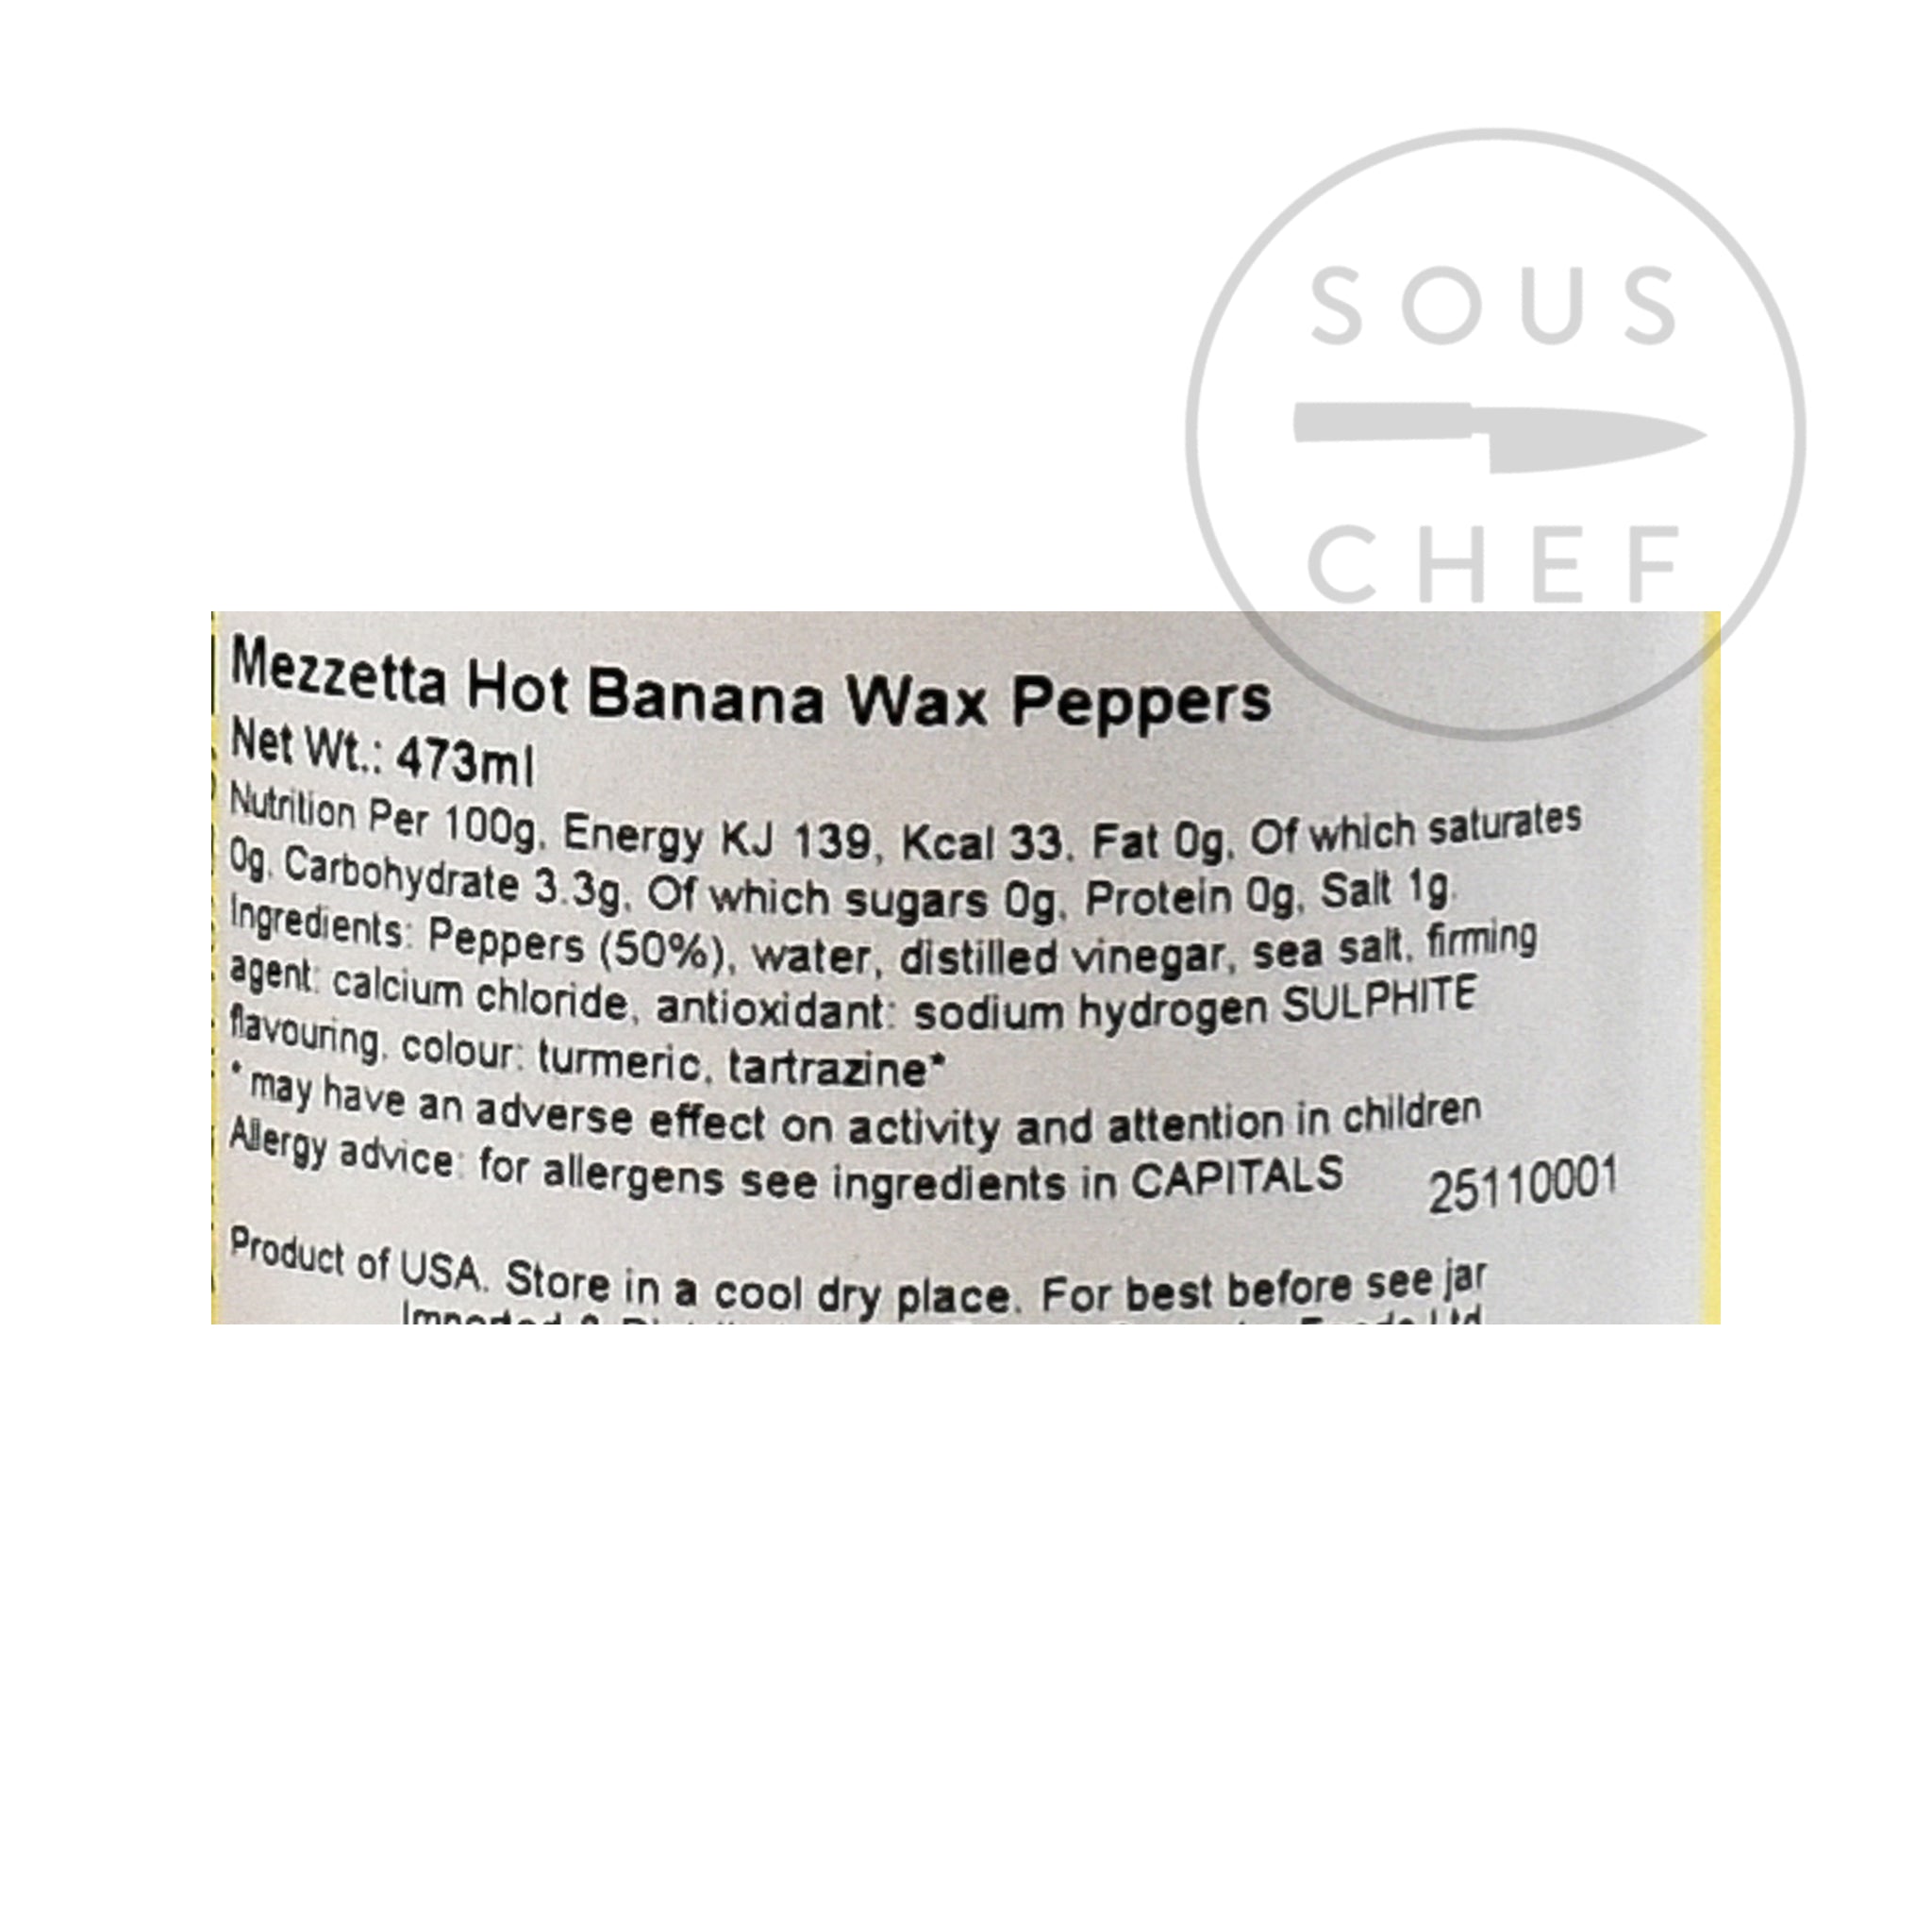 Hot Banana Wax Peppers 473g nutritional information ingredients